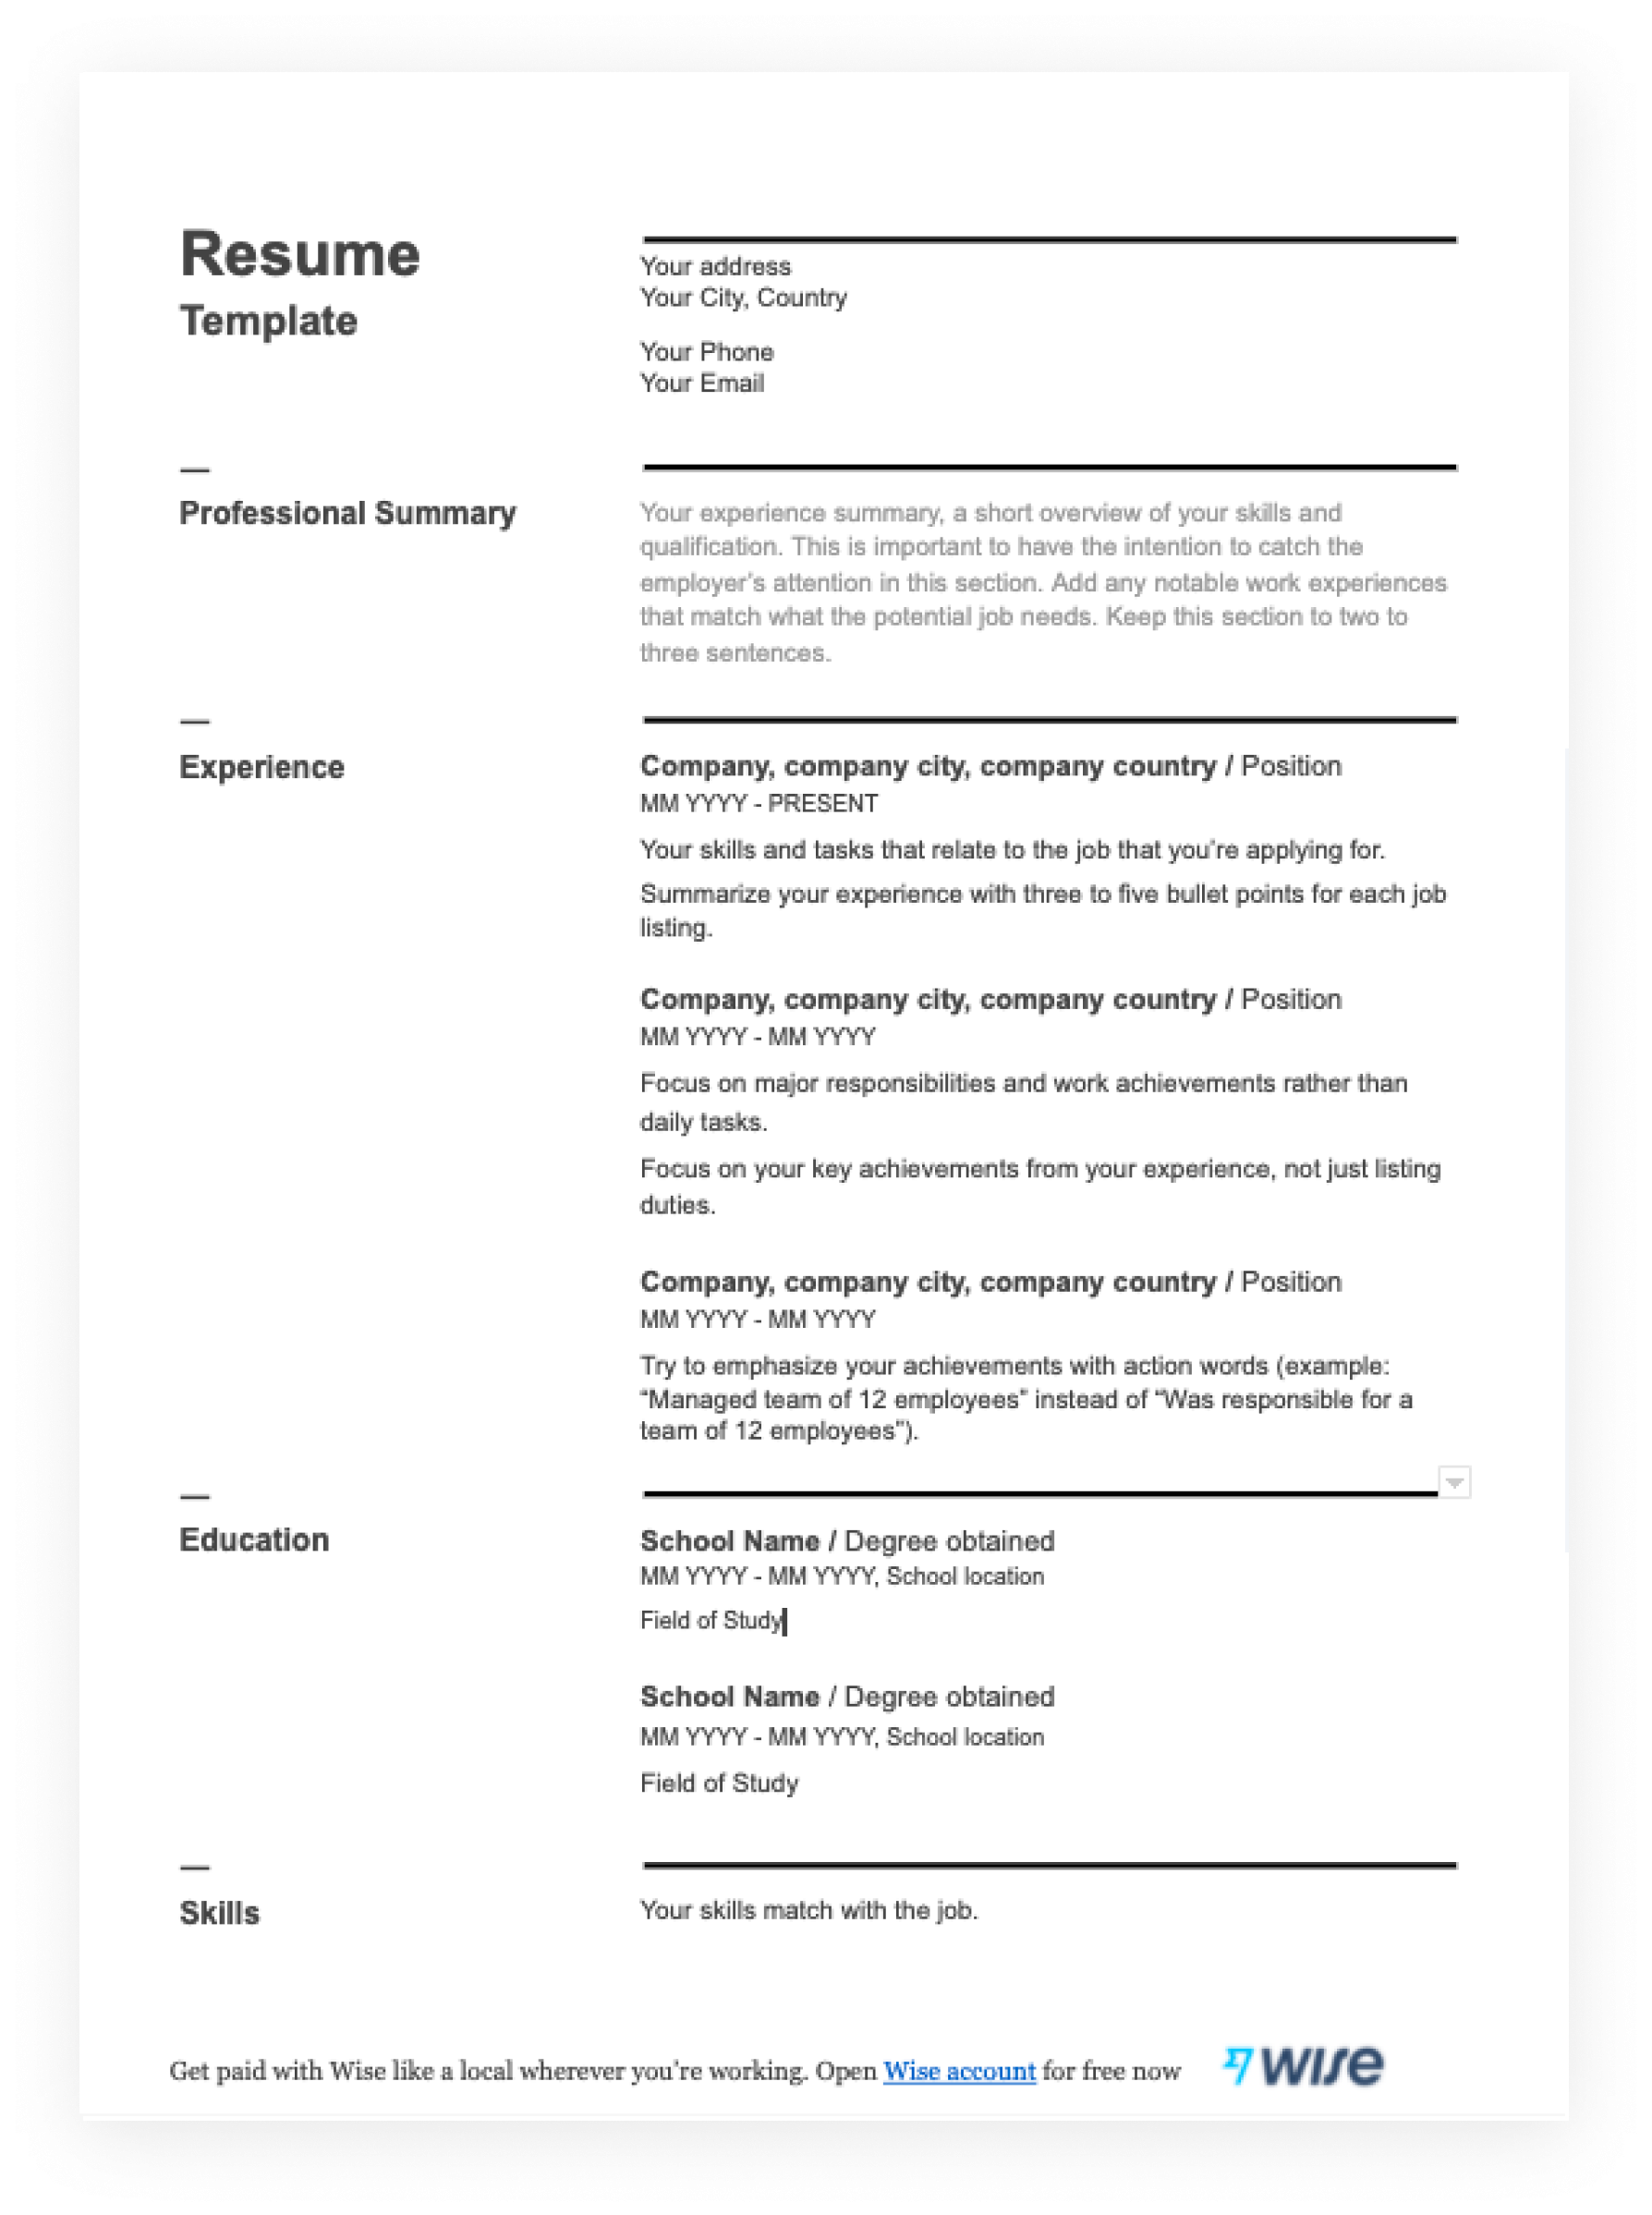 Free simple resume template download